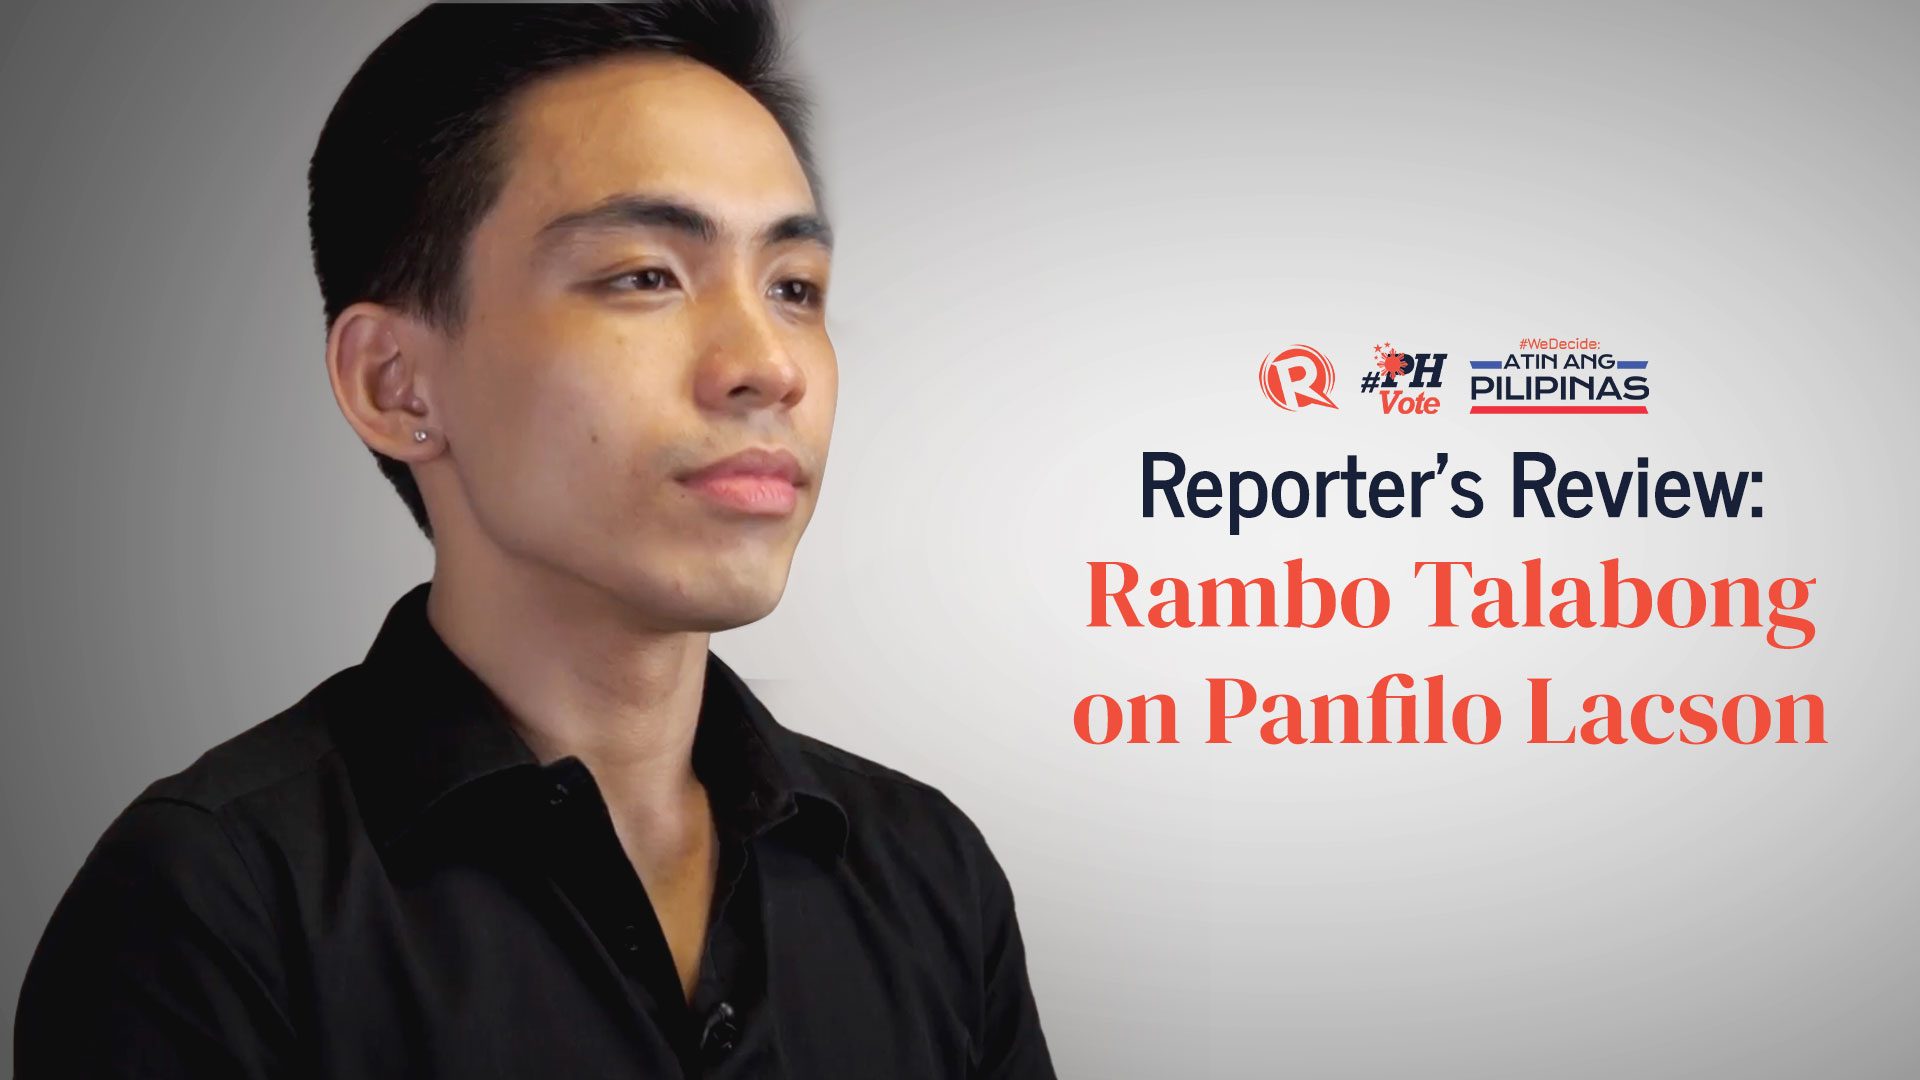 Reporter’s Review: Rambo Talabong on Panfilo Lacson